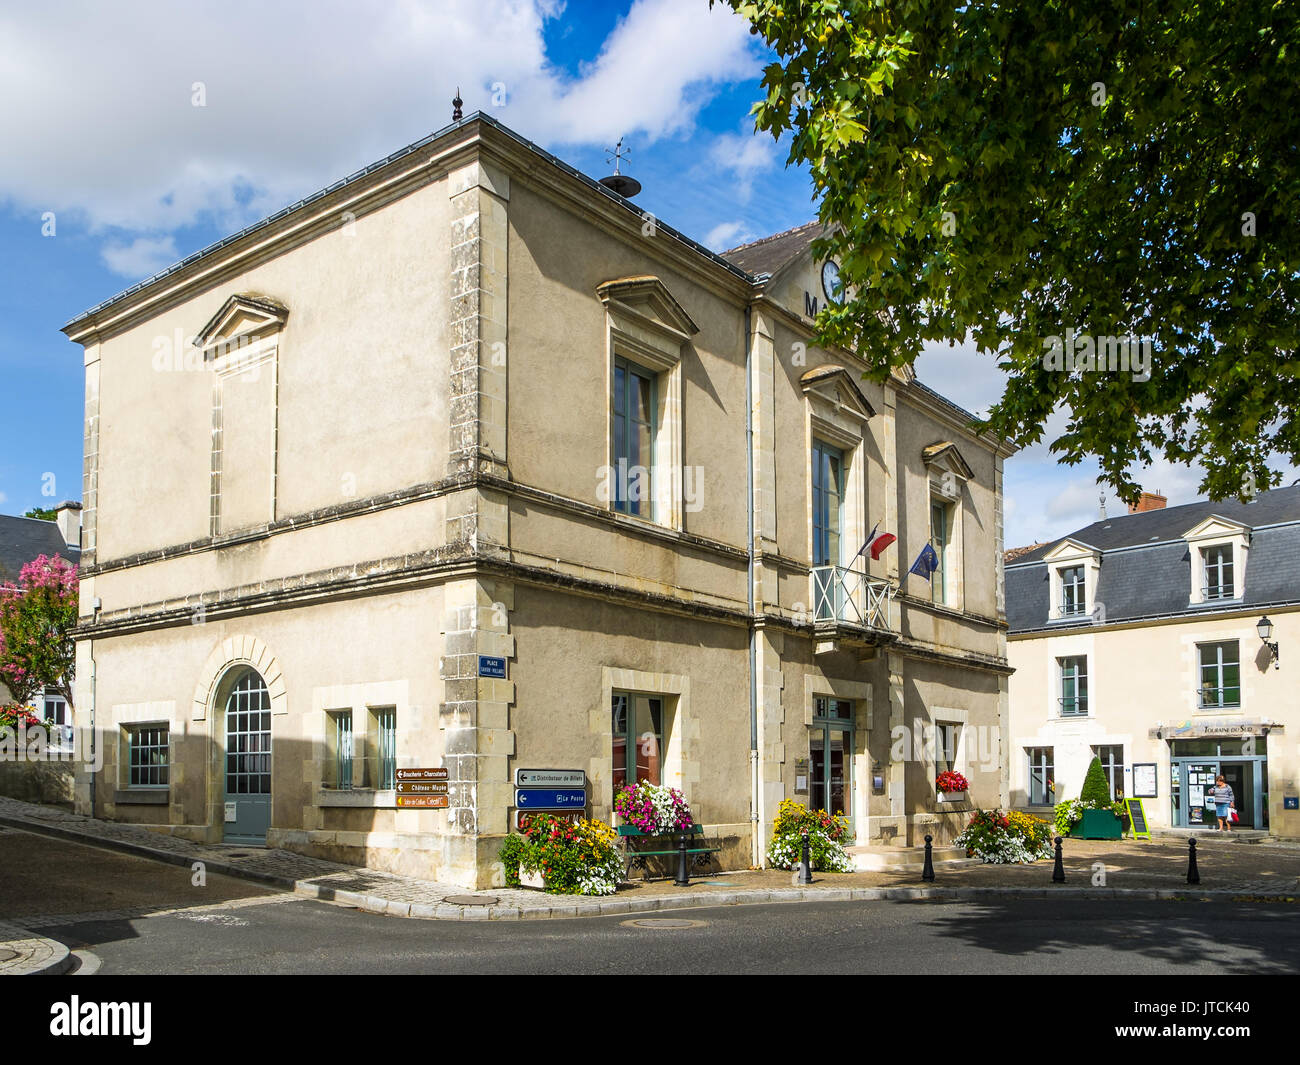 Mairie (town hall), Le Grande Pressigny, France. Stock Photo